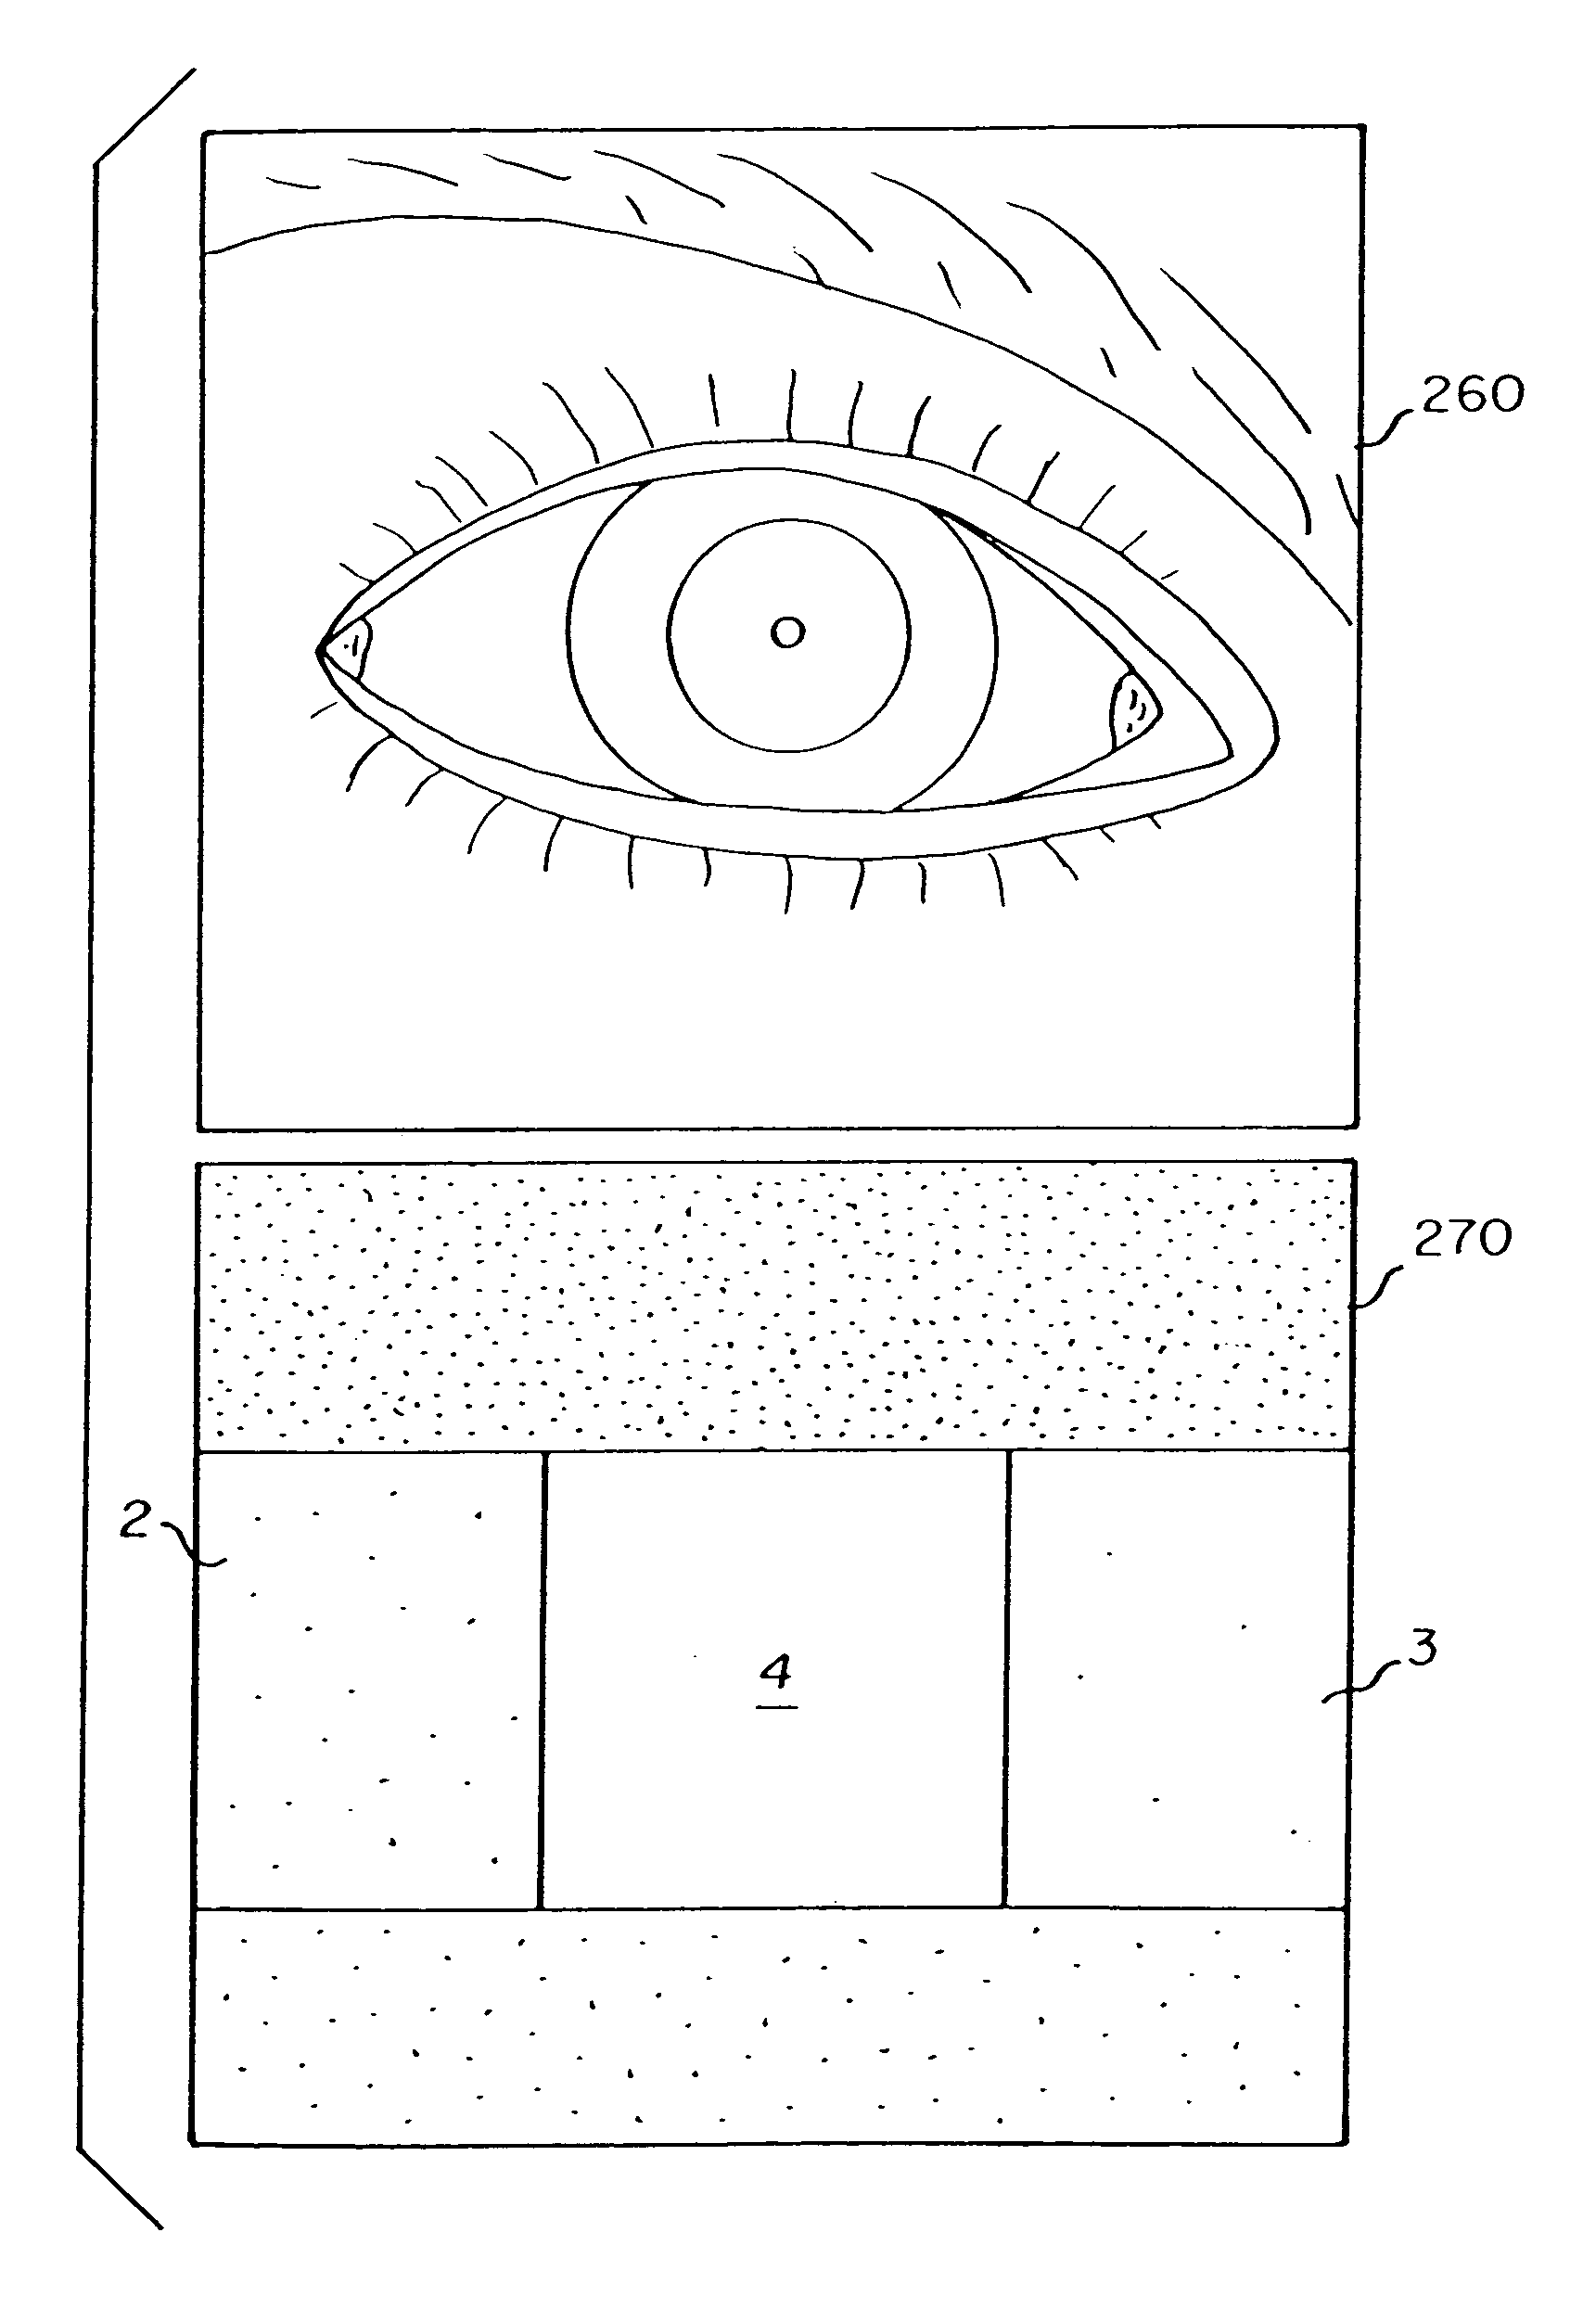 Method for detecting objects in digital images